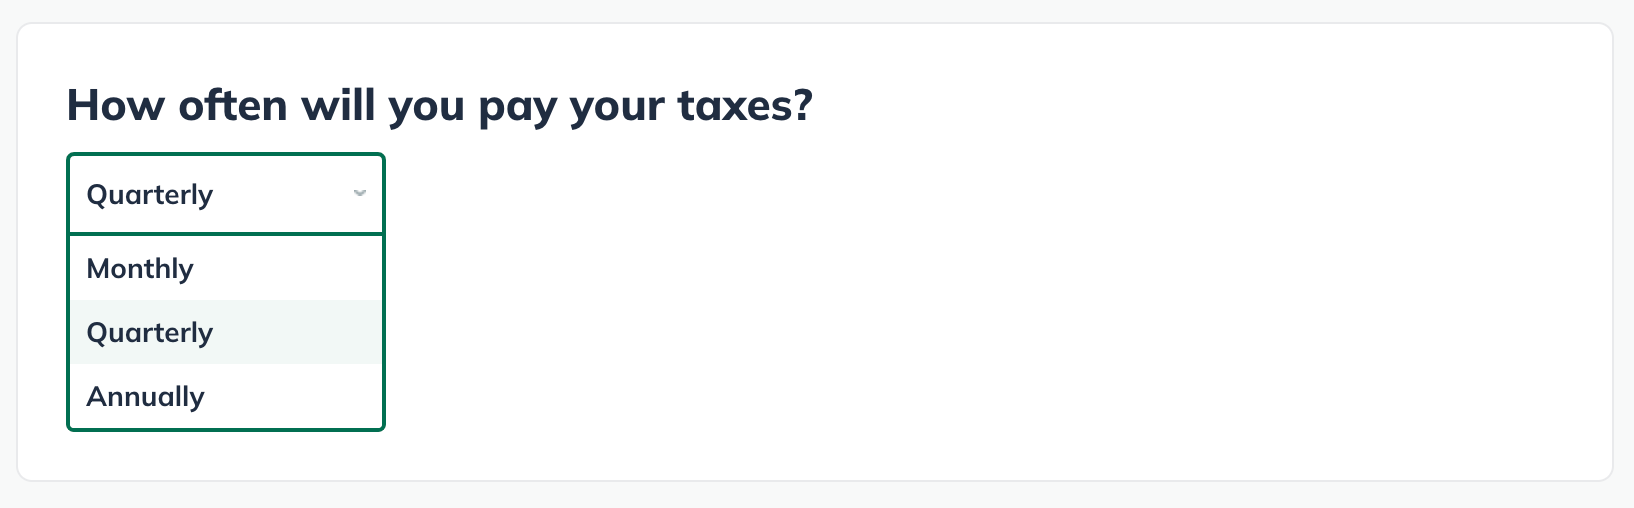 how often will you pay your taxes drop down.png